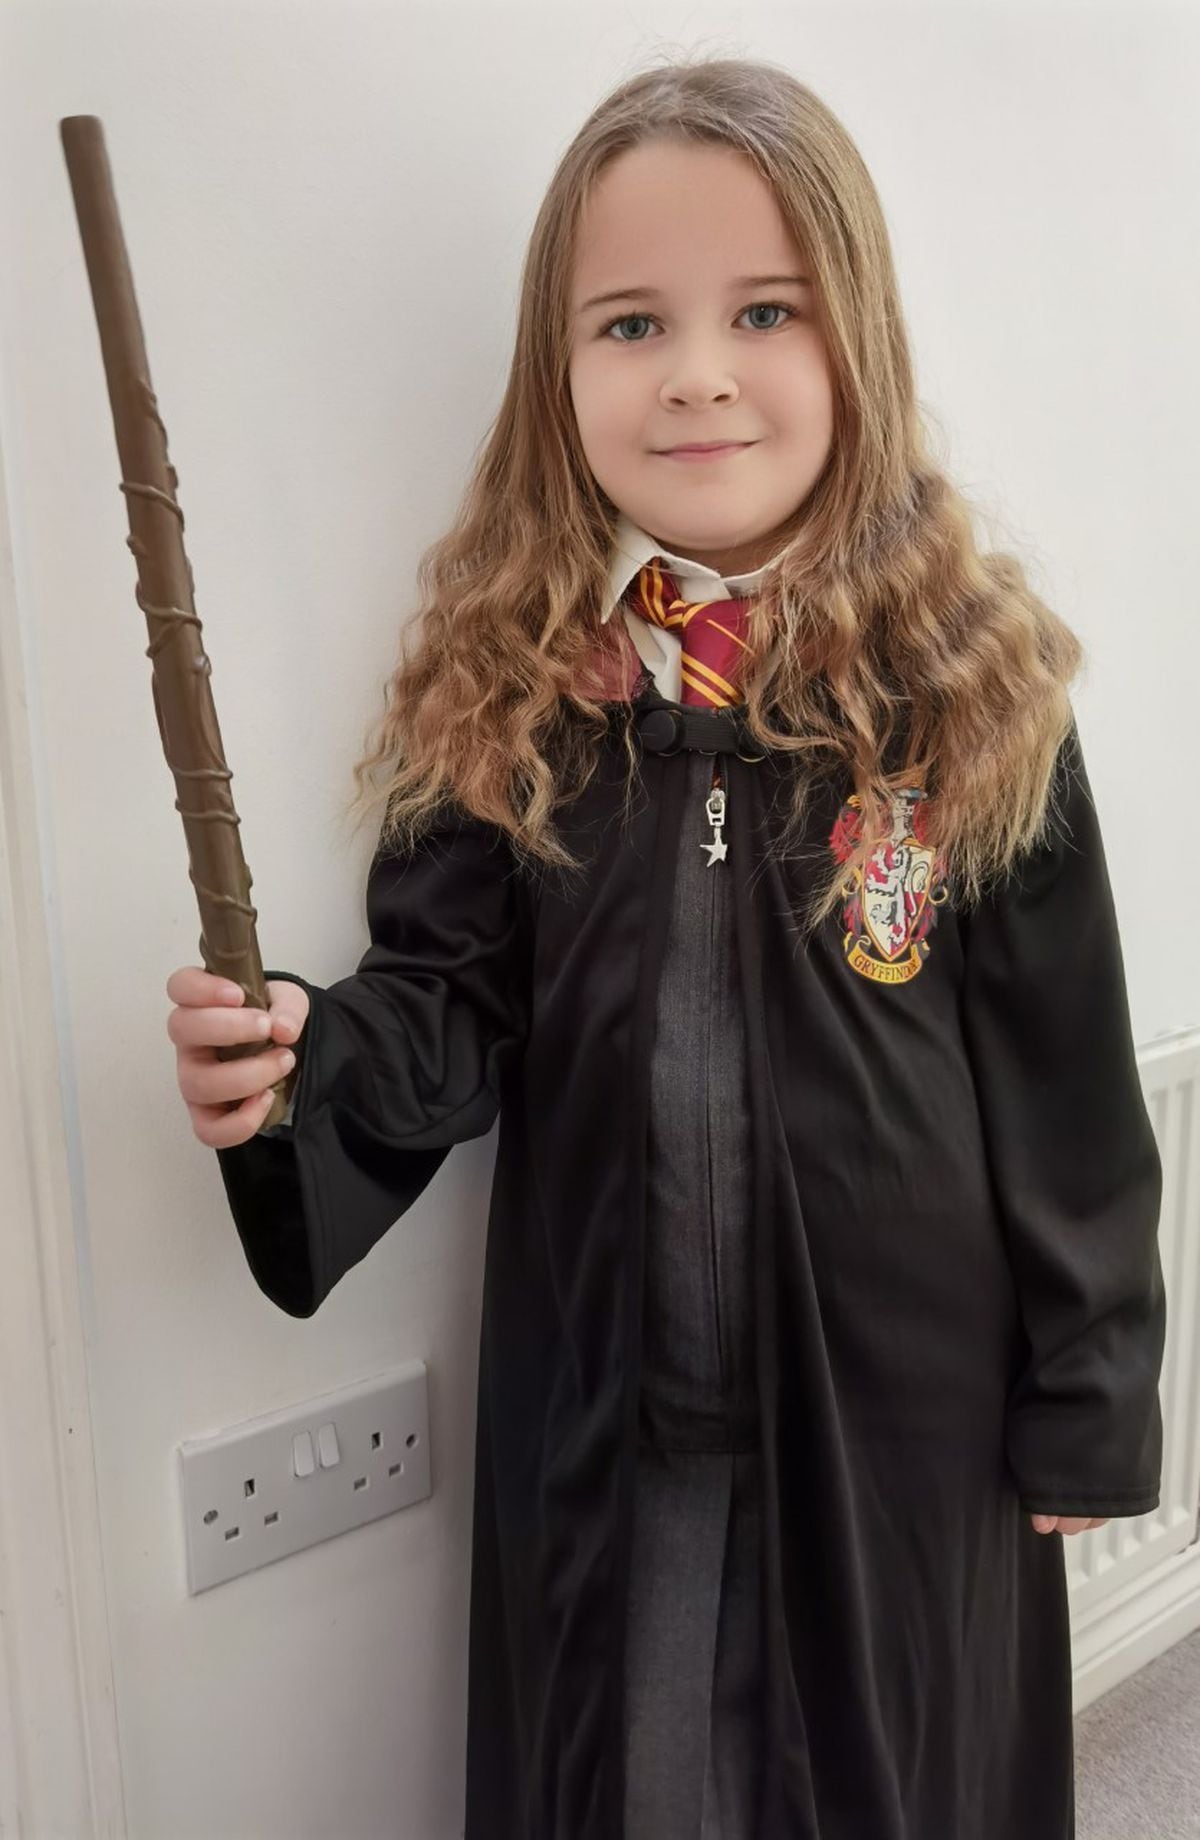 Florence, aged 6, dressed as Hermione Granger from Harry Potter 